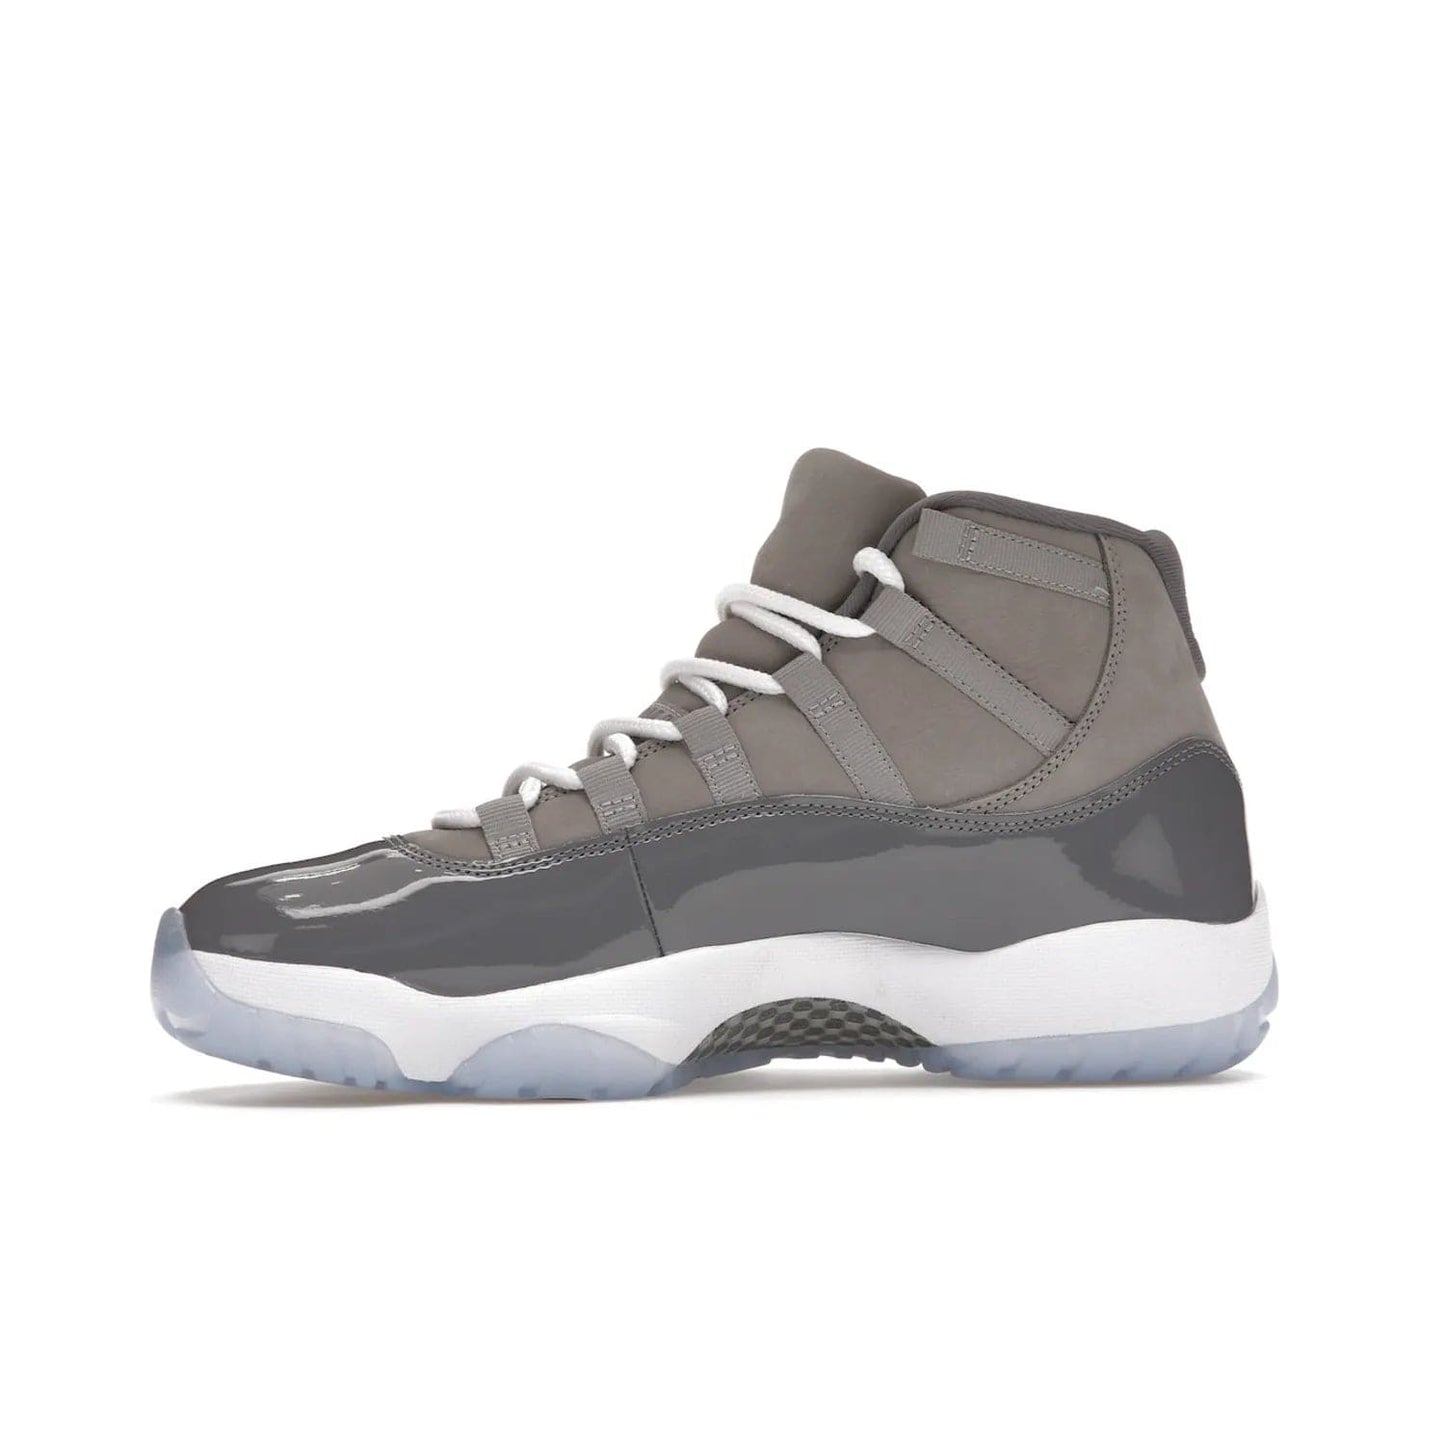 Jordan 11 Retro Cool Grey (2021) - Image 18 - Only at www.BallersClubKickz.com - Shop the Air Jordan 11 Retro Cool Grey (2021) for a must-have sneaker with a Cool Grey Durabuck upper, patent leather overlays, signature Jumpman embroidery, a white midsole, icy blue translucent outsole, and Multi-Color accents.  Released in December 2021 for $225.